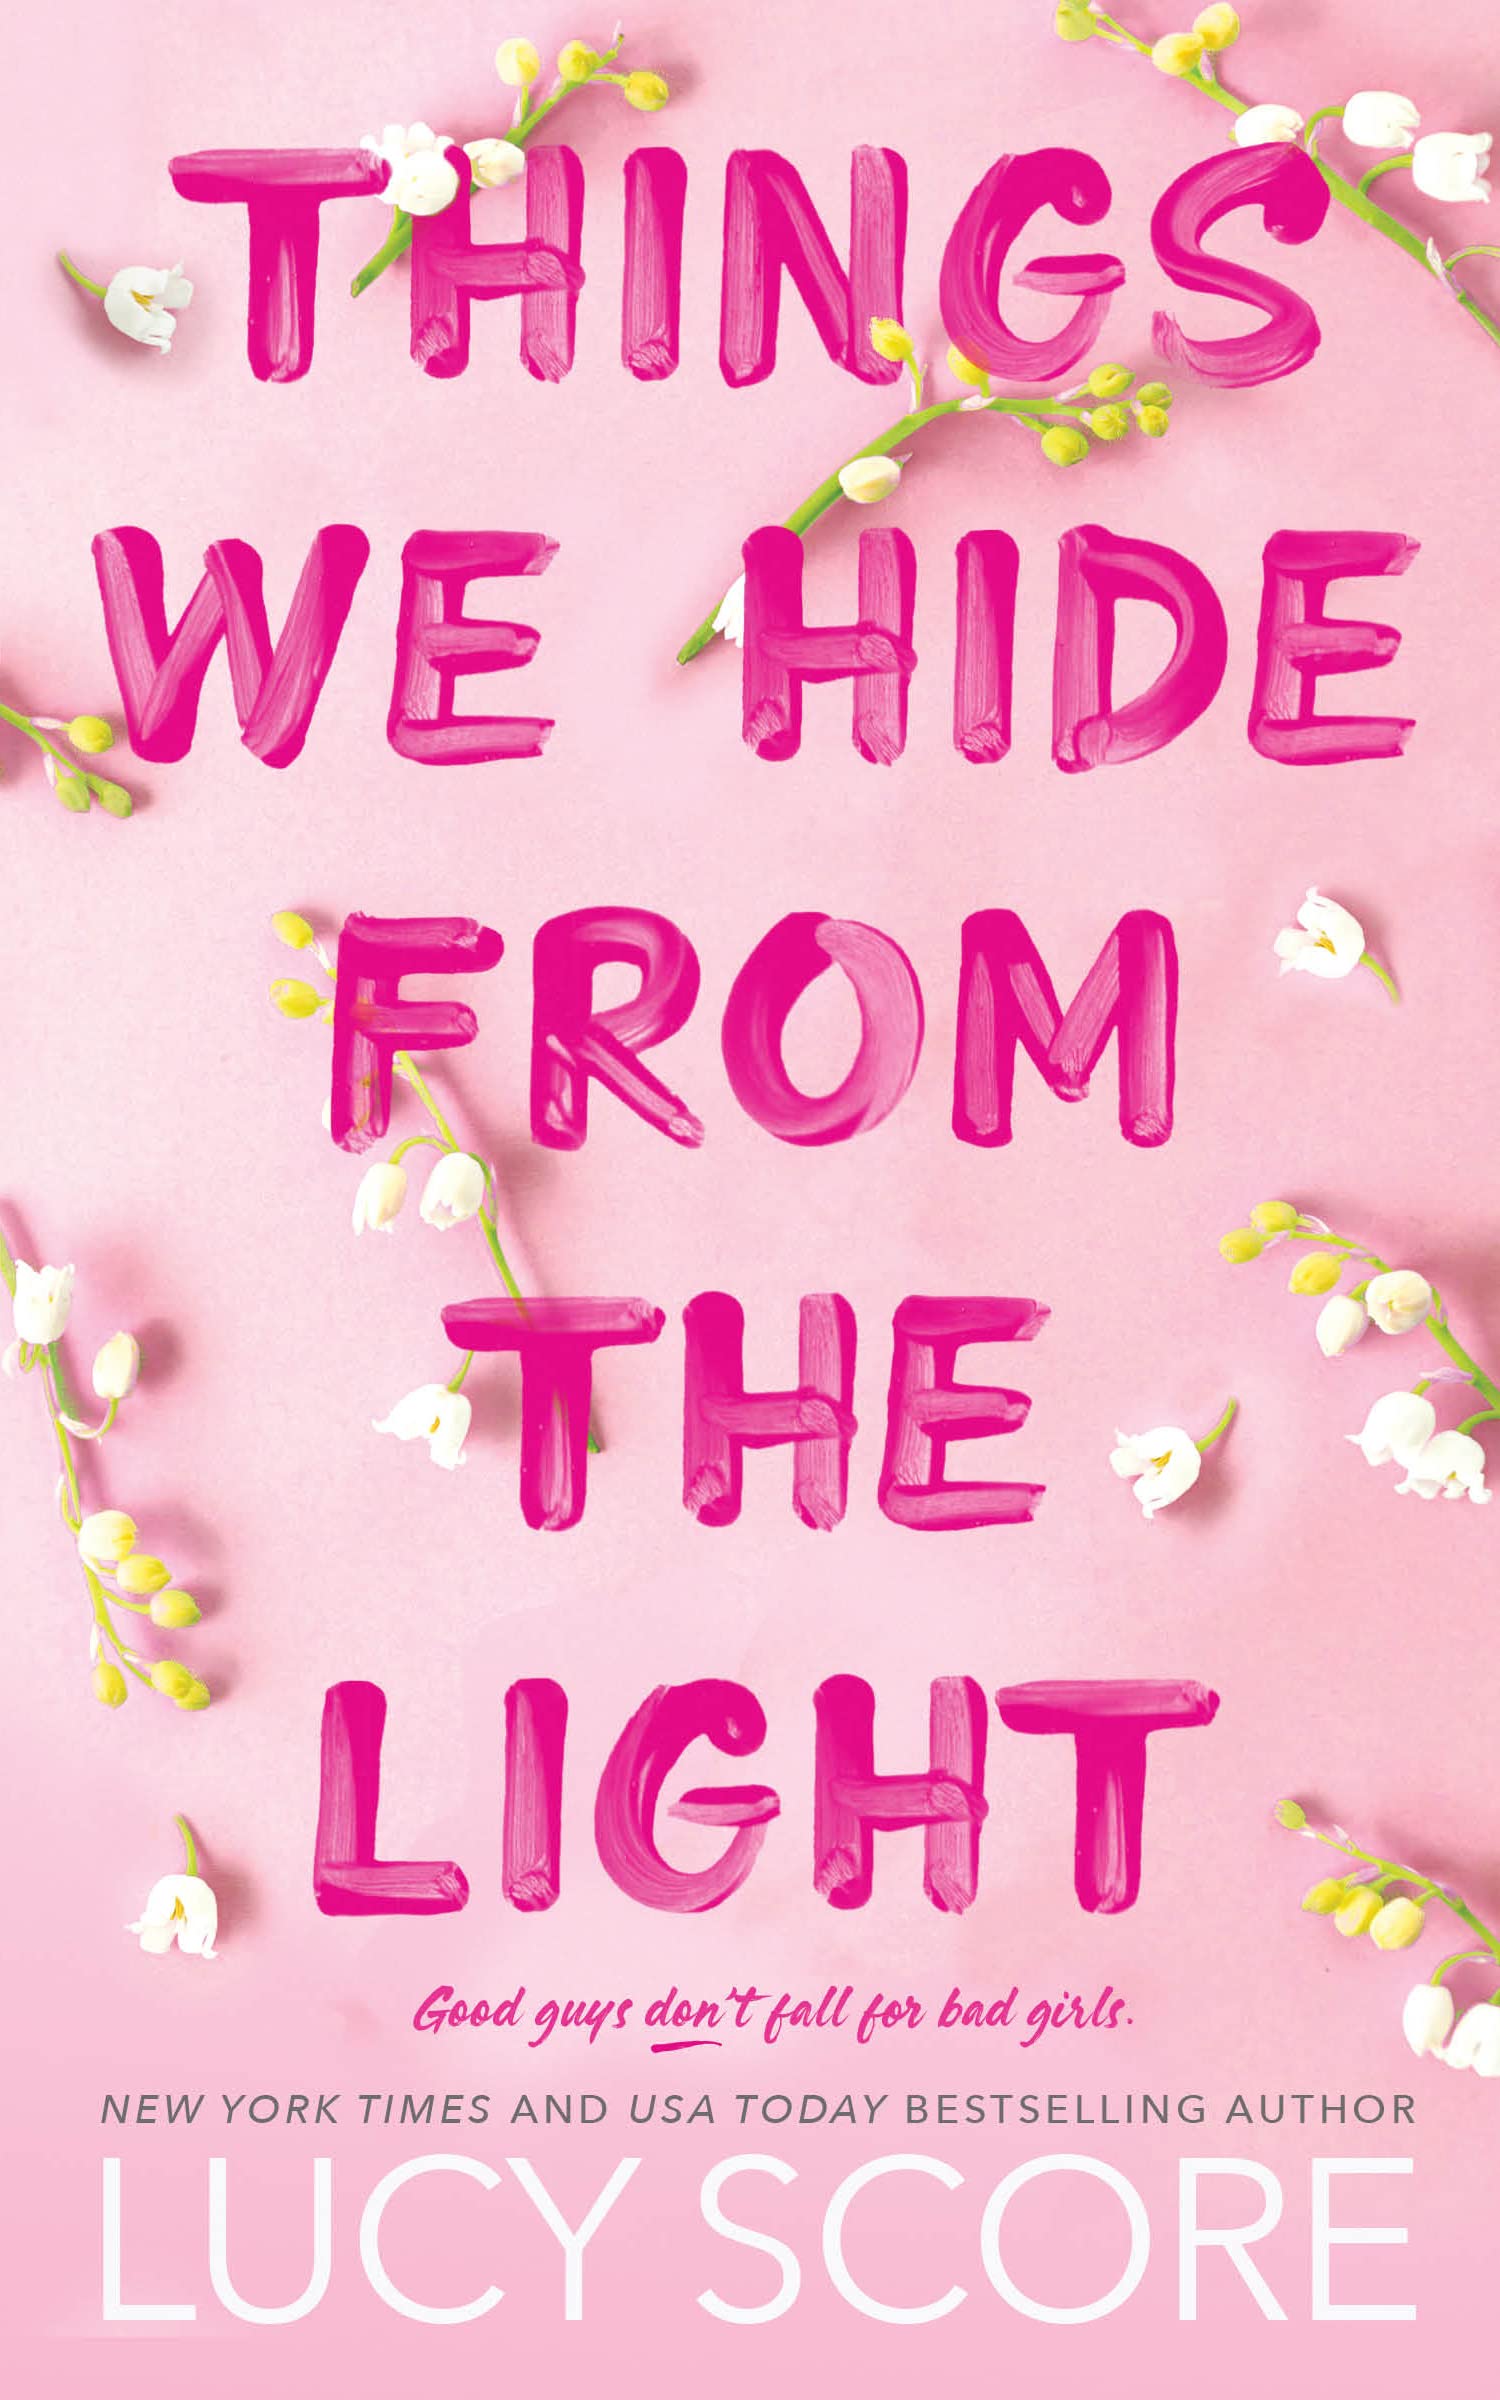 Image for "Things We Hide from the Light"